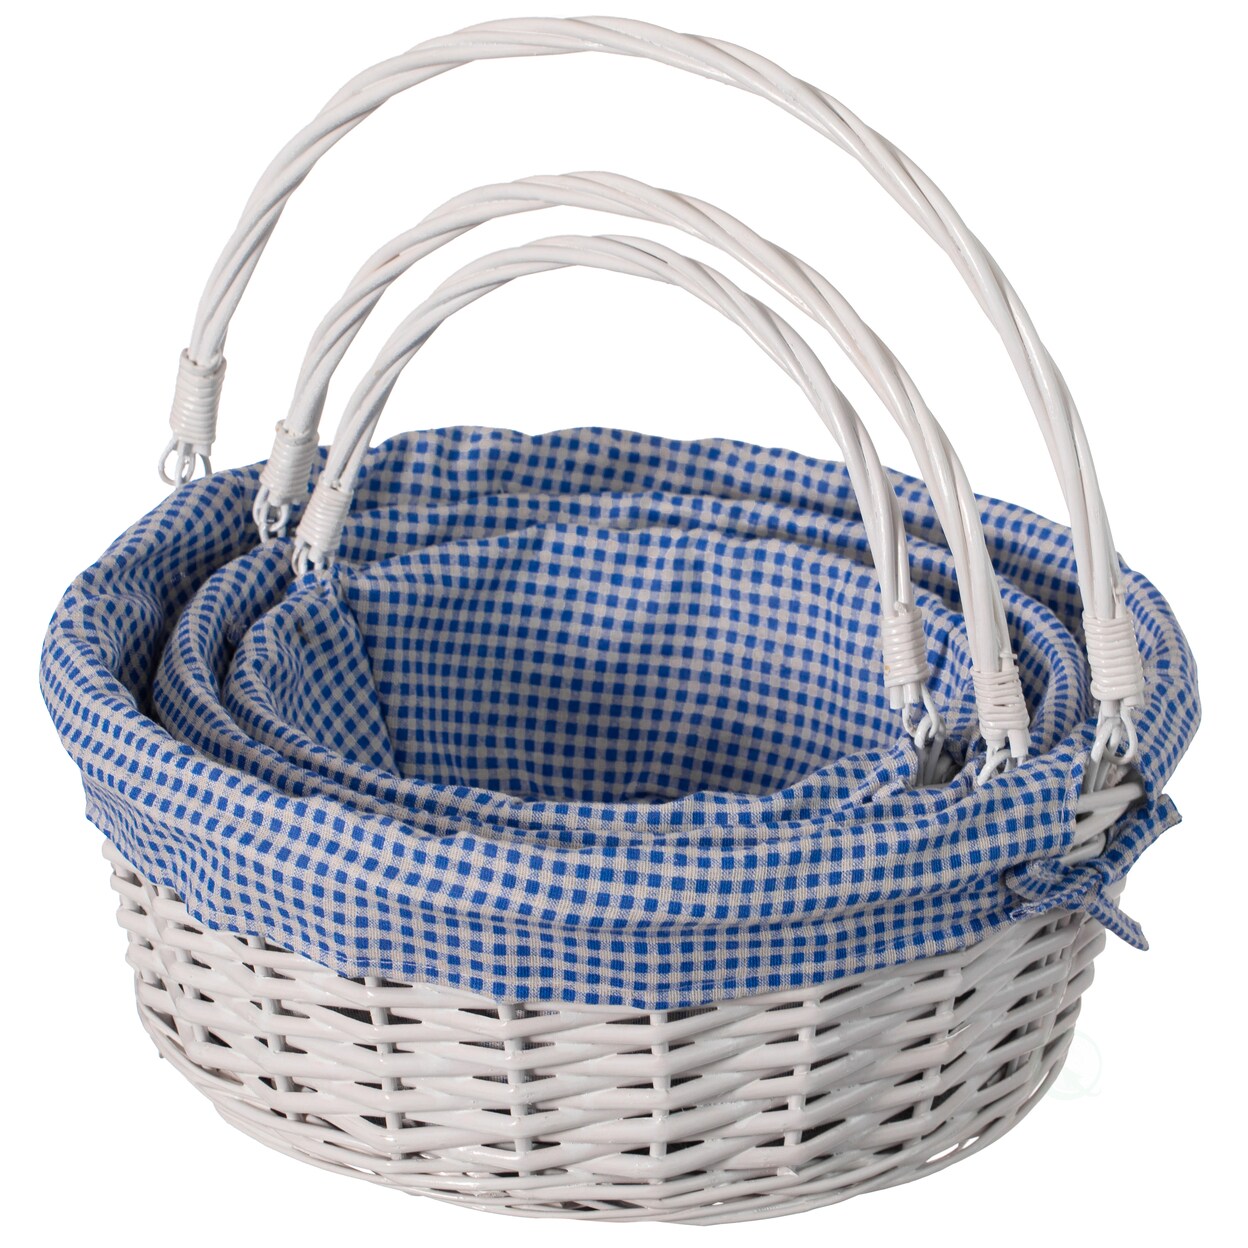 Wickerwise Traditional White Round Willow Gift Basket with Gingham Liner and Sturdy Foldable Handles Food Snacks Storage Basket